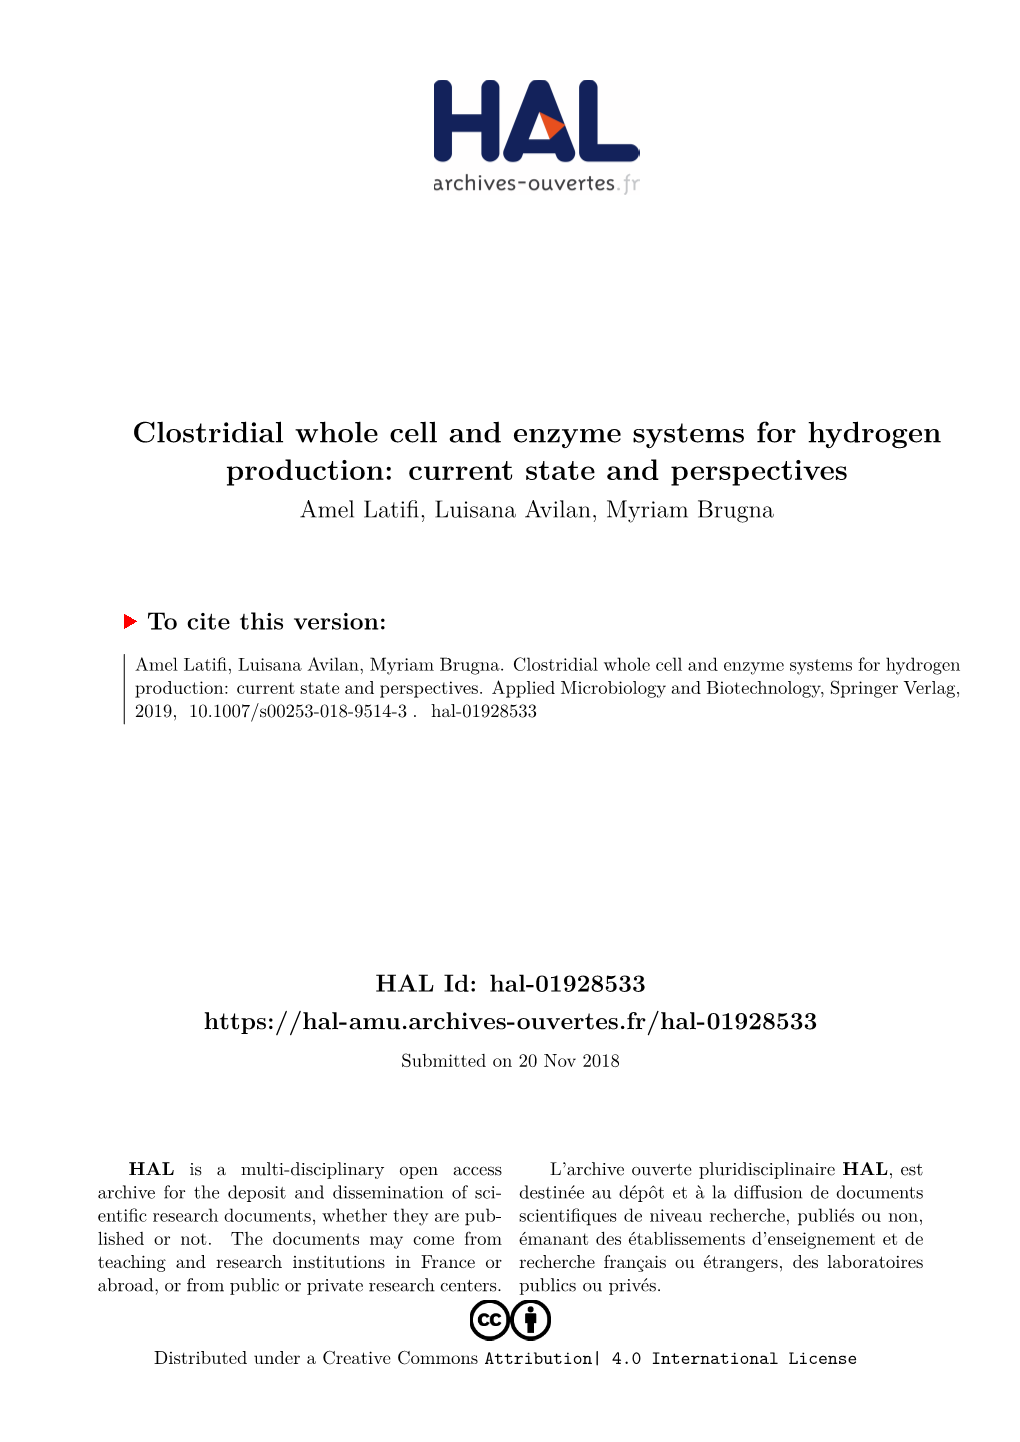 Clostridial Whole Cell and Enzyme Systems for Hydrogen Production: Current State and Perspectives Amel Latifi, Luisana Avilan, Myriam Brugna